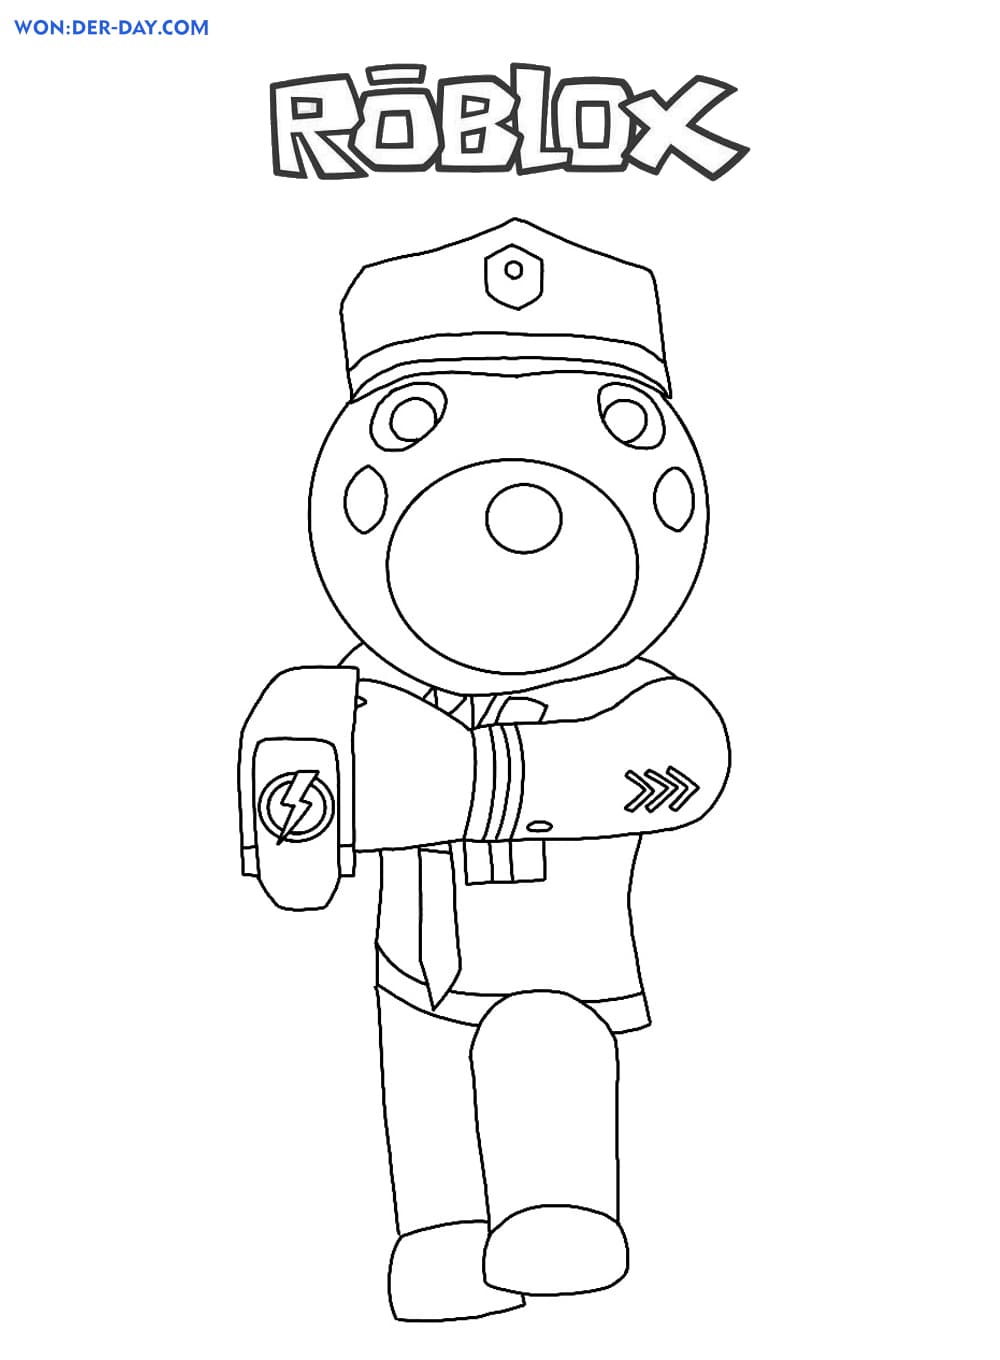 Piggy Roblox Coloring Pages Wonder Day Coloring Pages For Children And Adults - roblox piggy officer doggy drawing